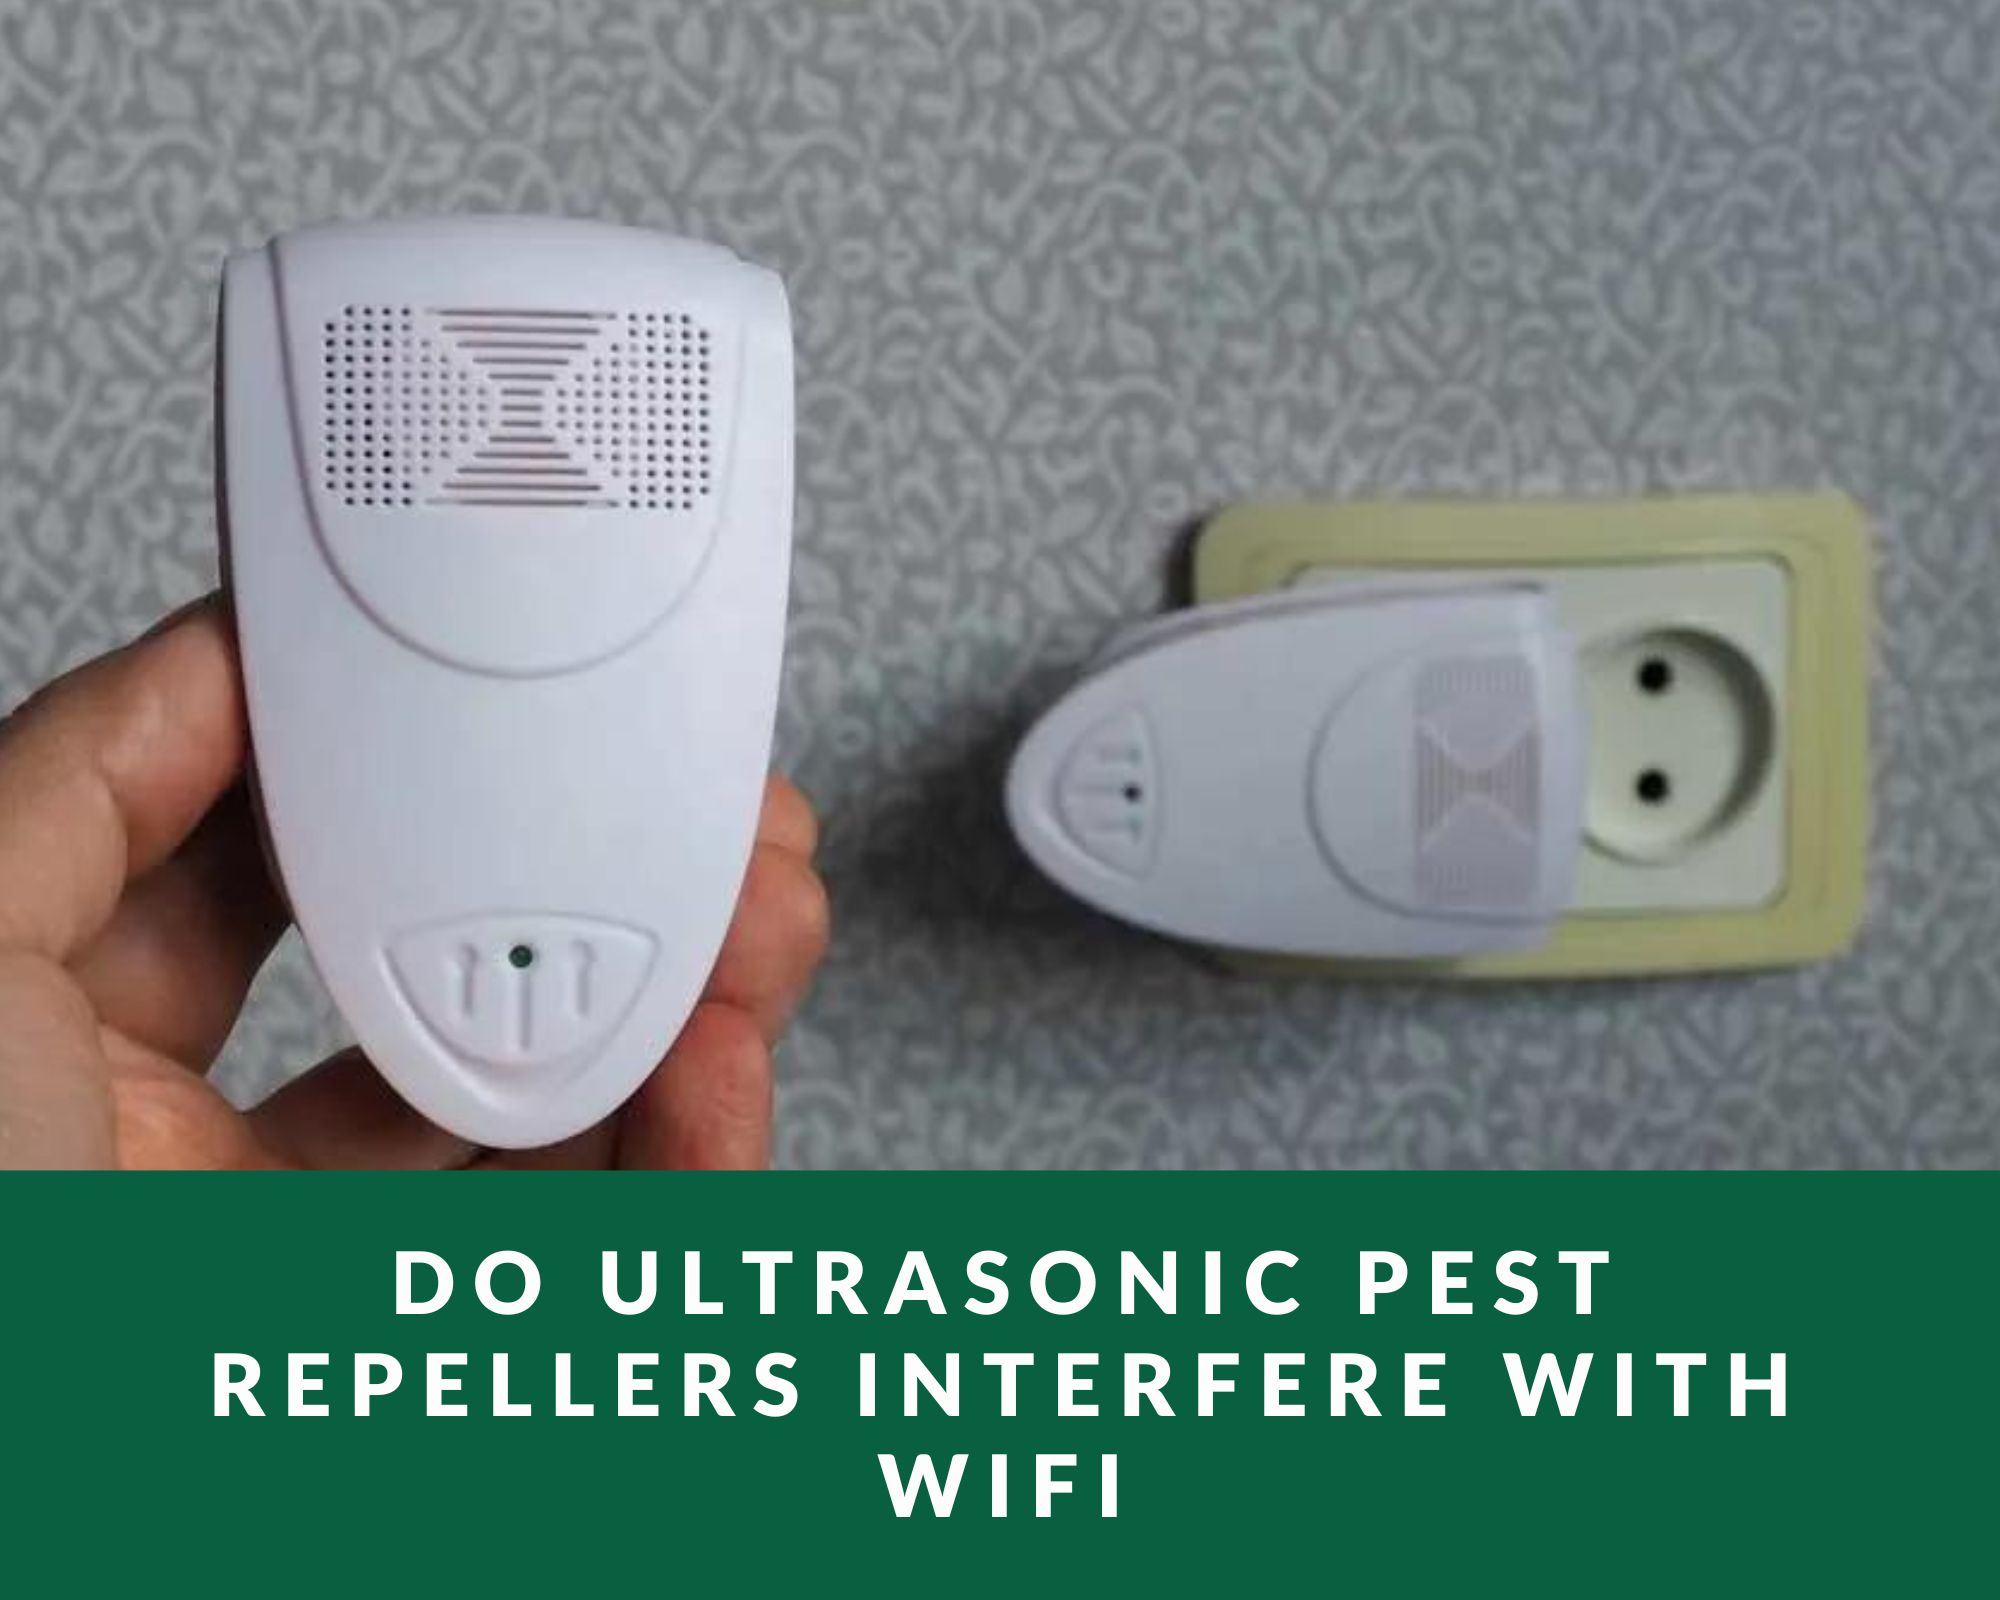 Do Ultrasonic Pest Repellers Interfere with Wifi